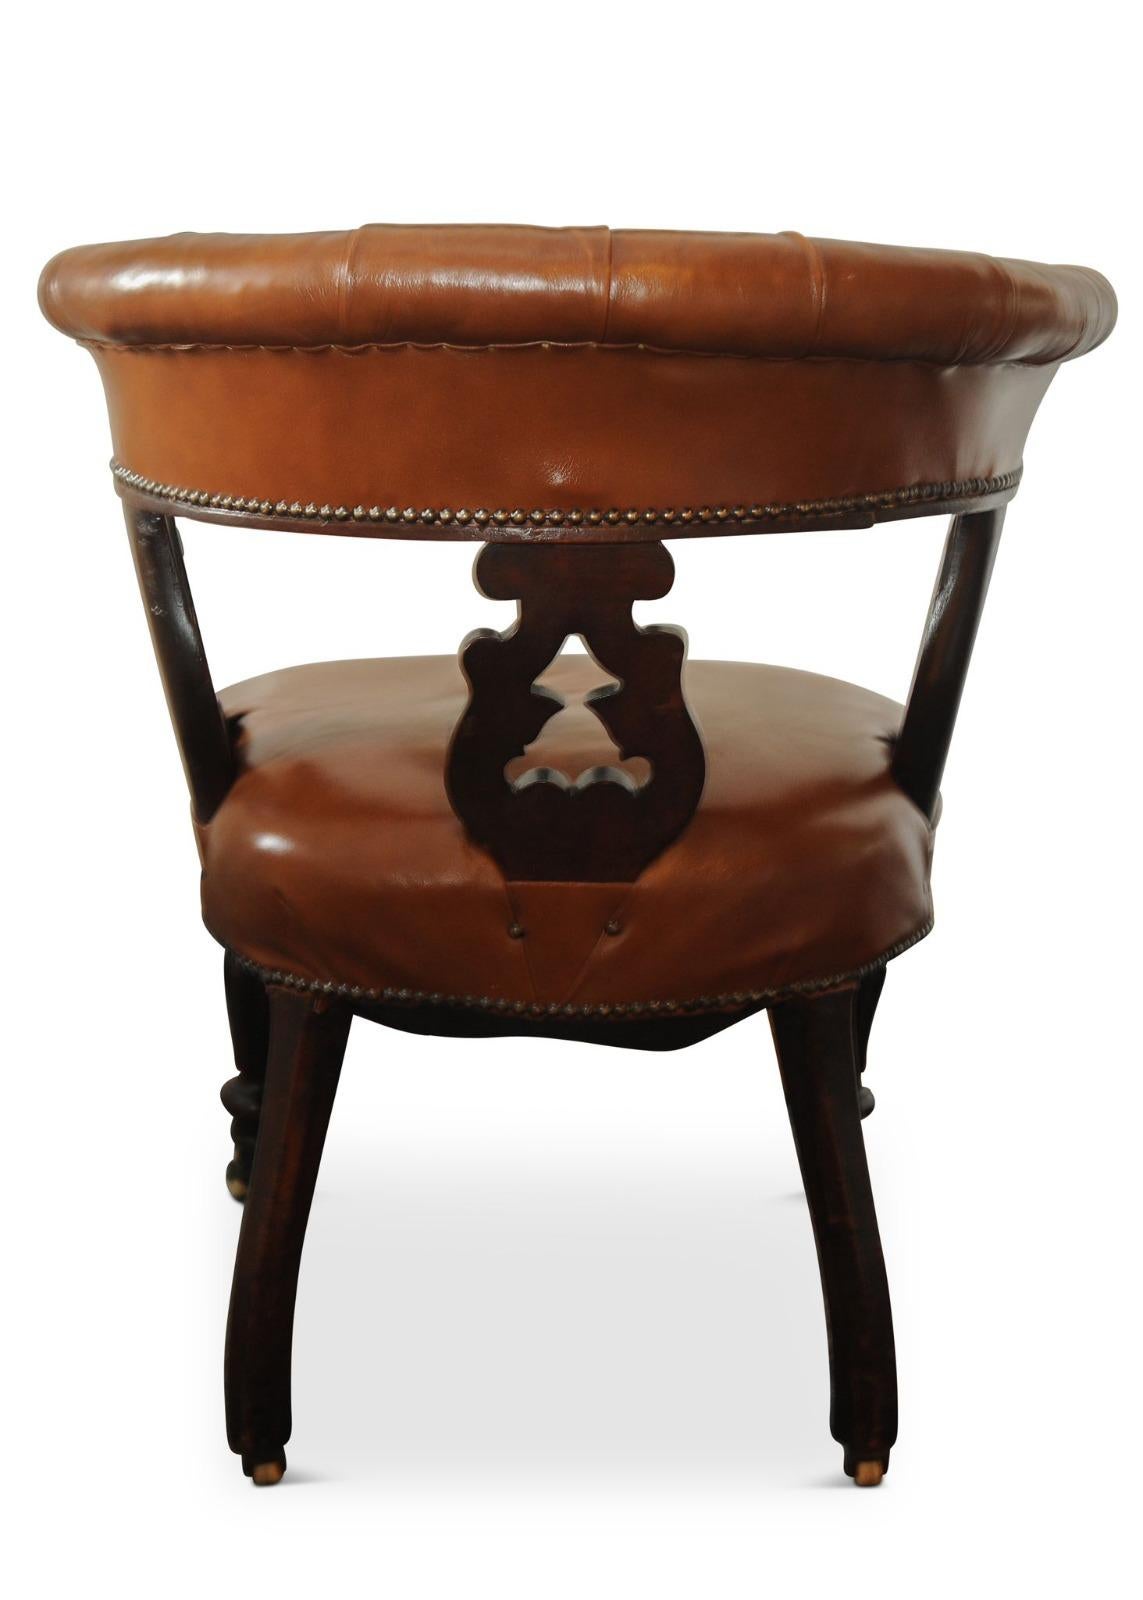 19th Century Regency William IV Polished Tan Leather Captains Library Chair with Castors For Sale